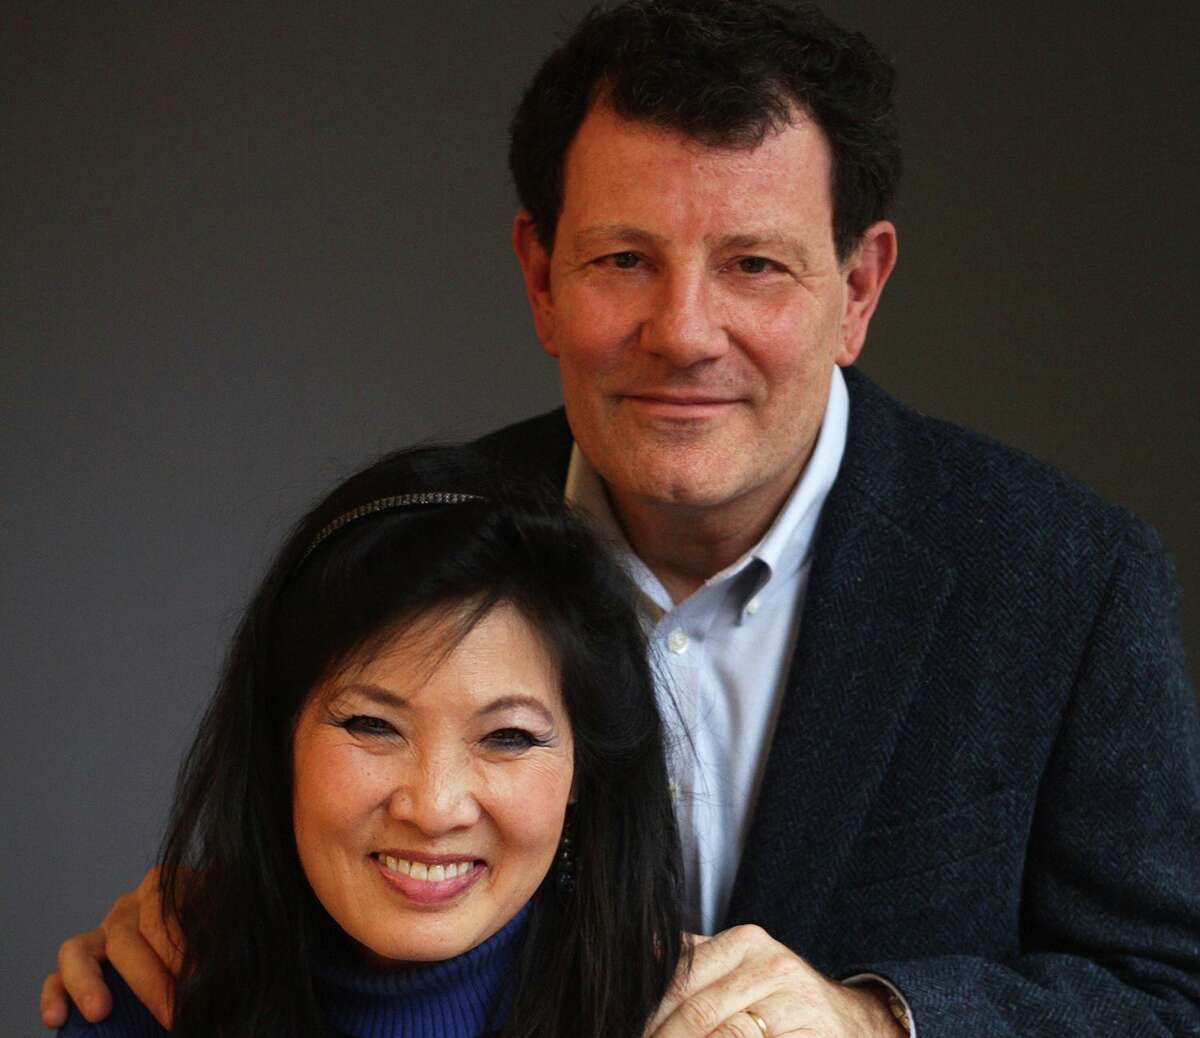 Nicholas Kristof and Sheryl WuDunn wrote "Tightrope: Americans Reaching for Hope" in 2020. They will speak Tuesday at a breakfast event to benefit Greenwich-based Family Centers.